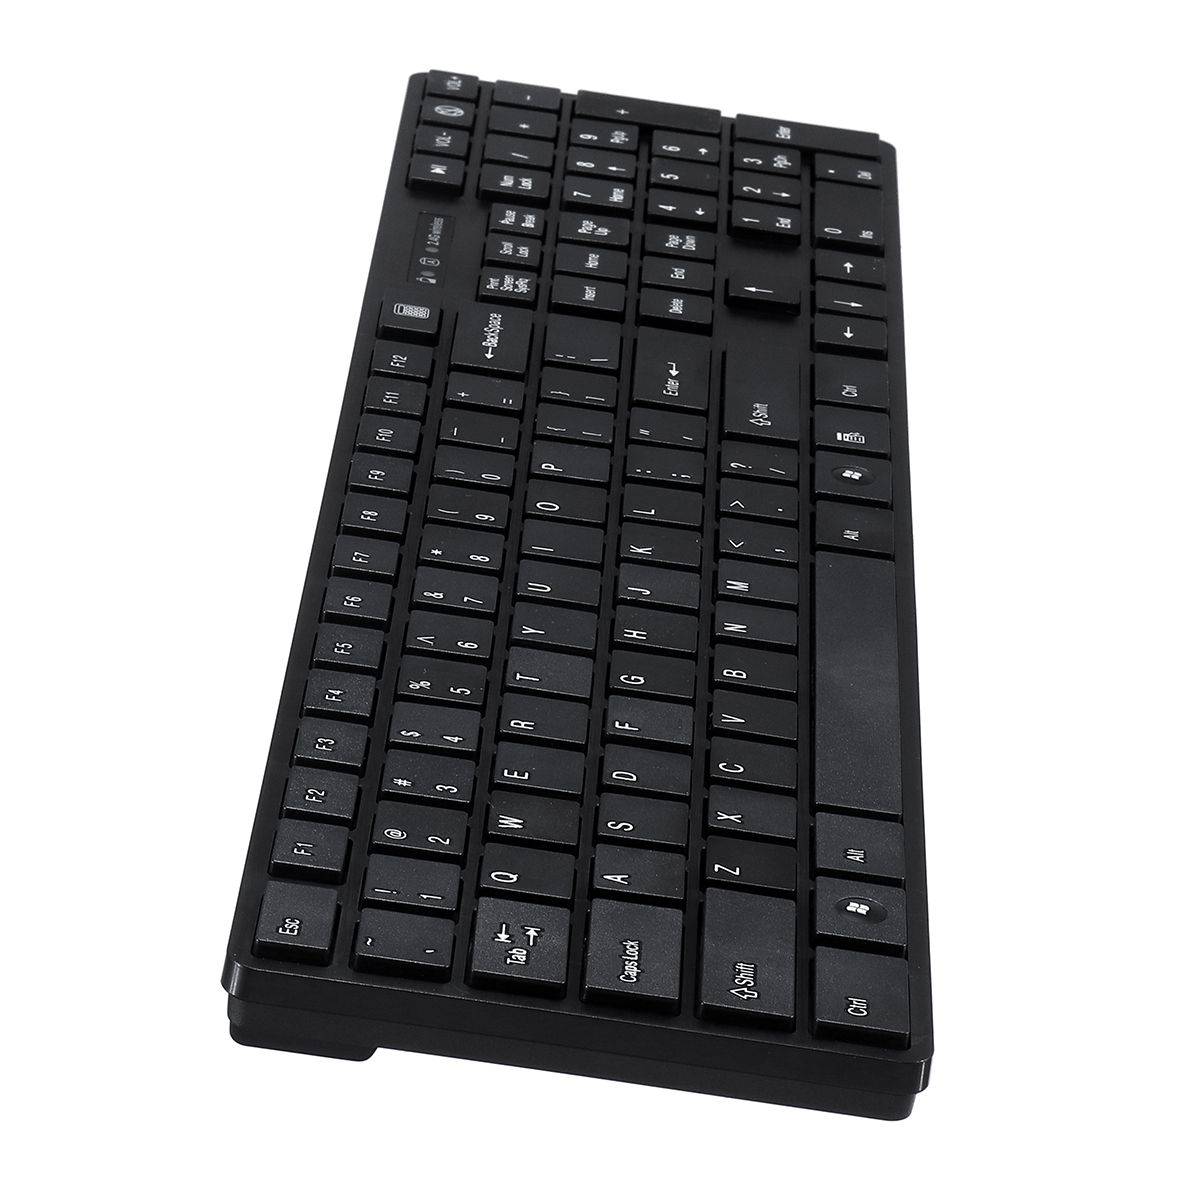 800-1200-1600DPI-Adjustable-24-GHZ-Wireless-Chocolate-Keycaps-Keyboard-and-Mouse-Combo-for-Play-Gami-1599808